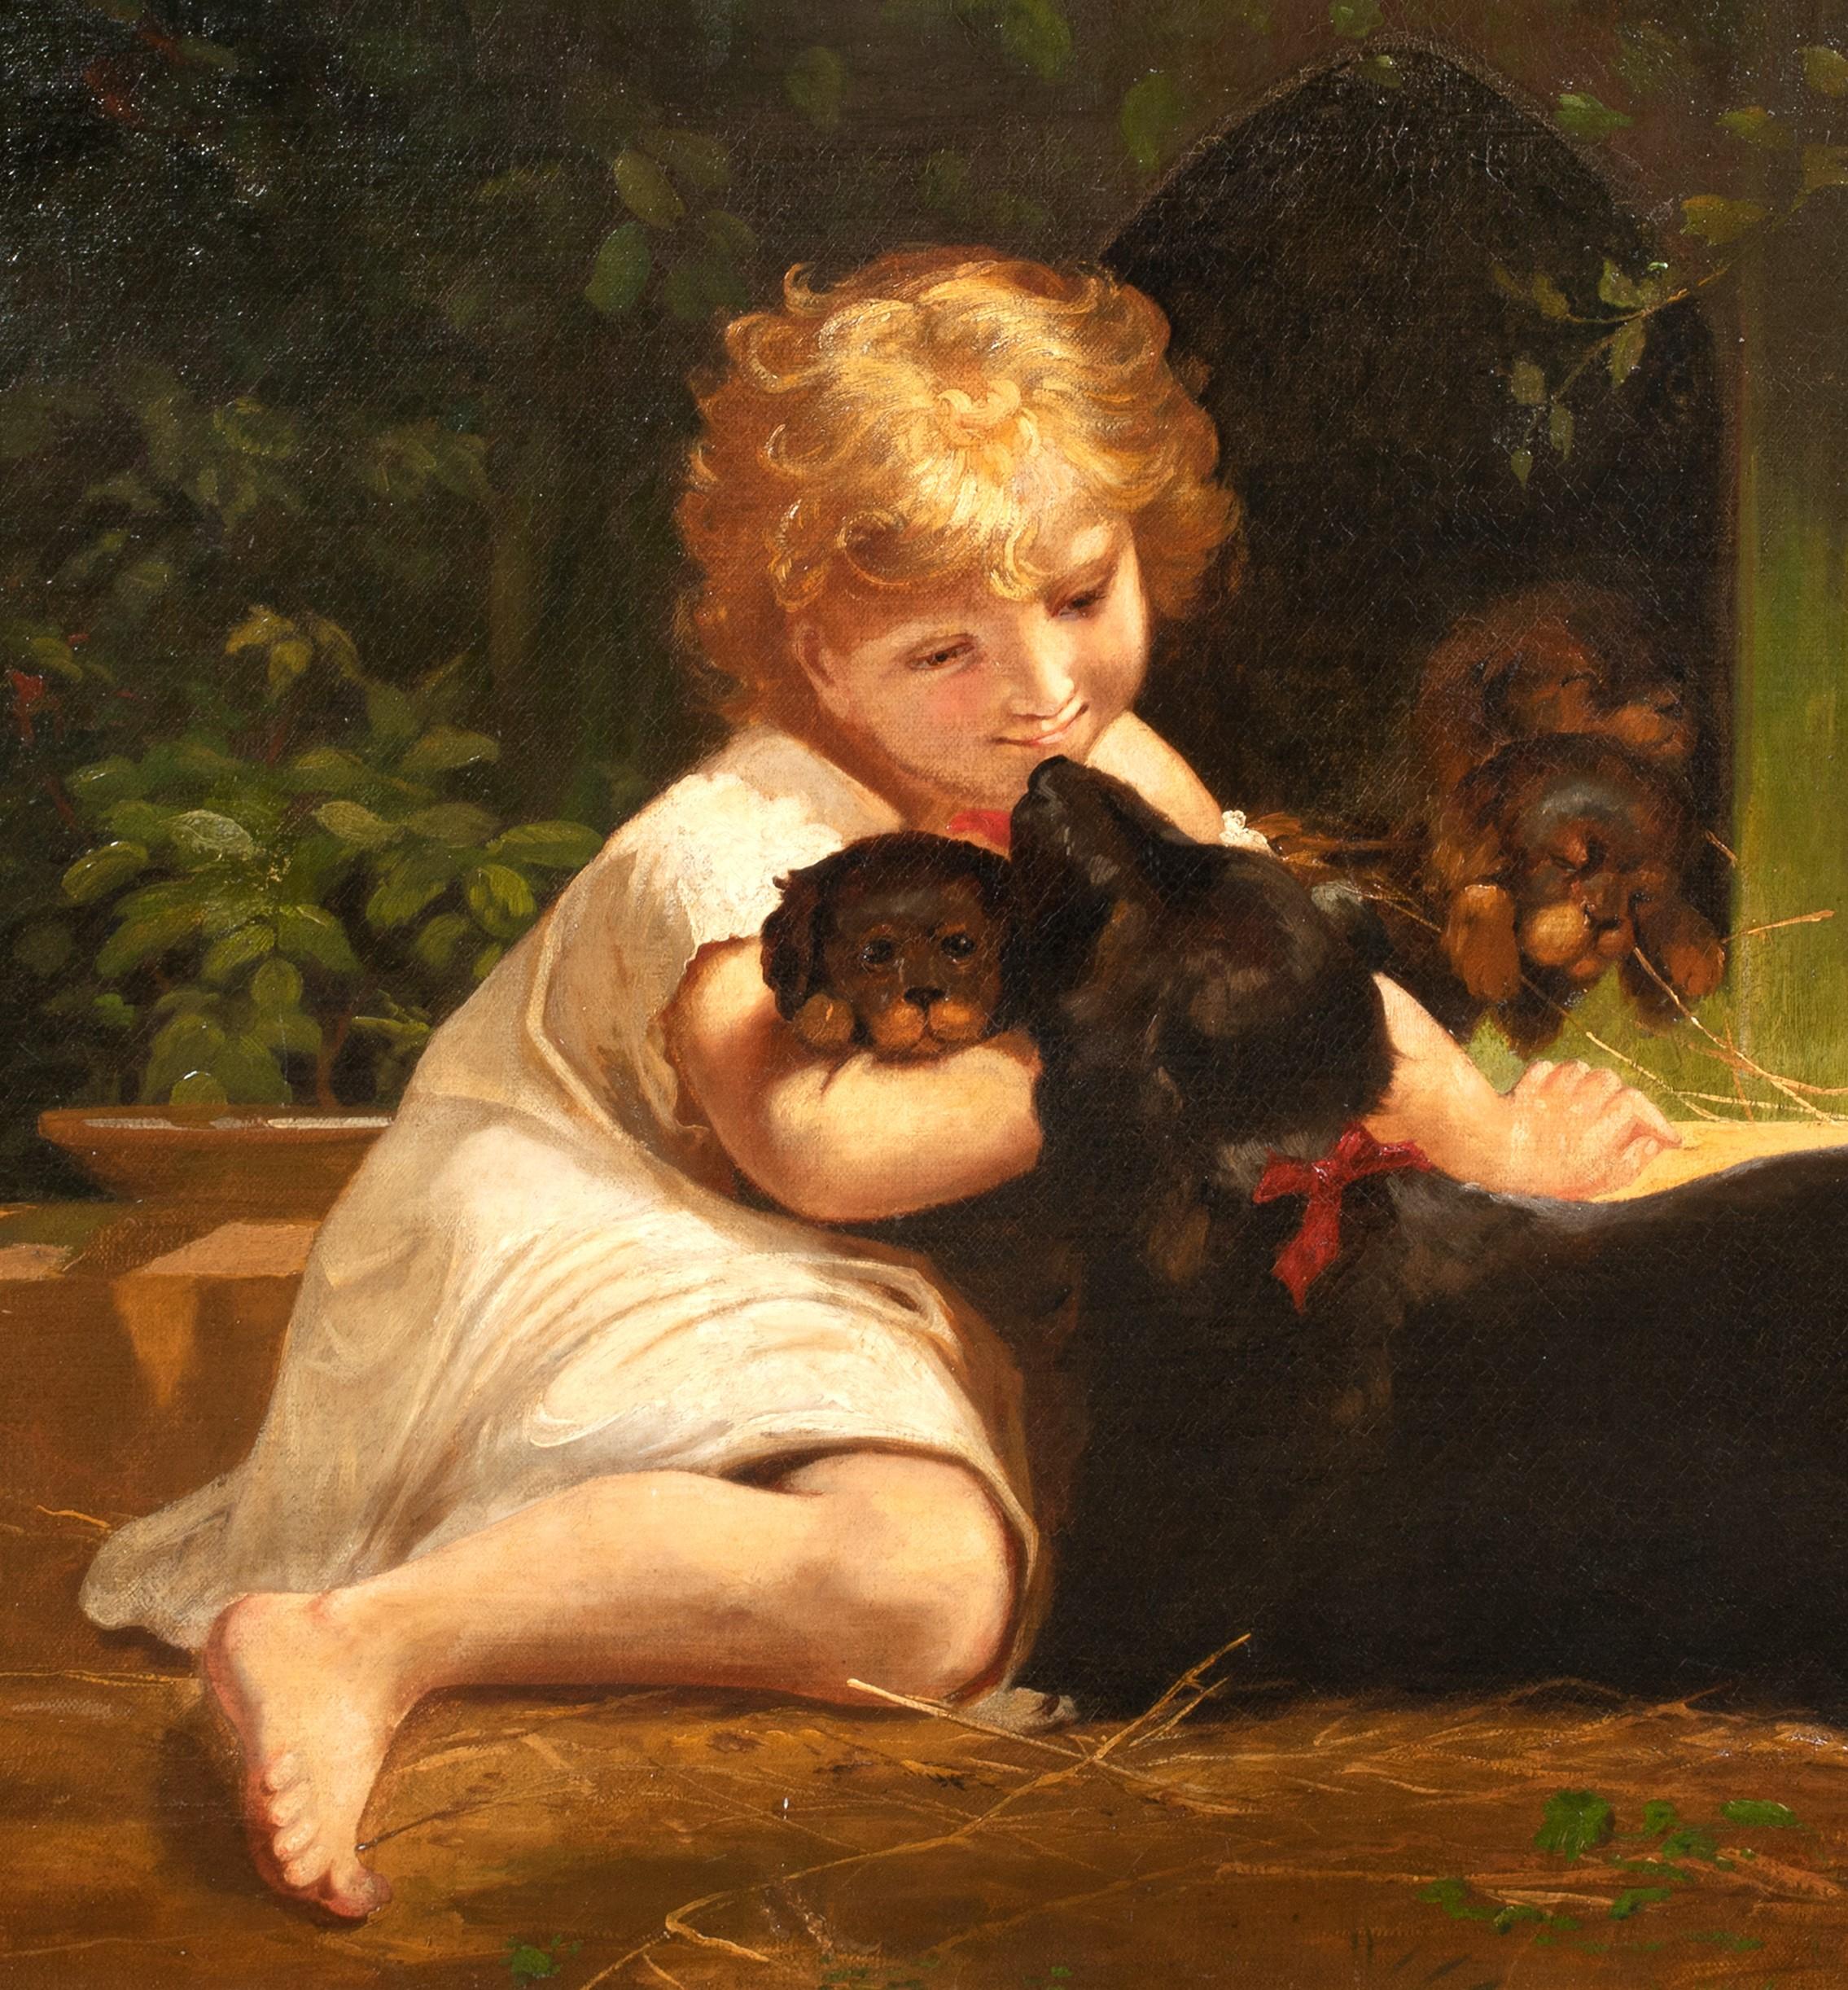 Portrait Of A Girl, Dachshund & Puppies, 19th Century - Brown Portrait Painting by Unknown